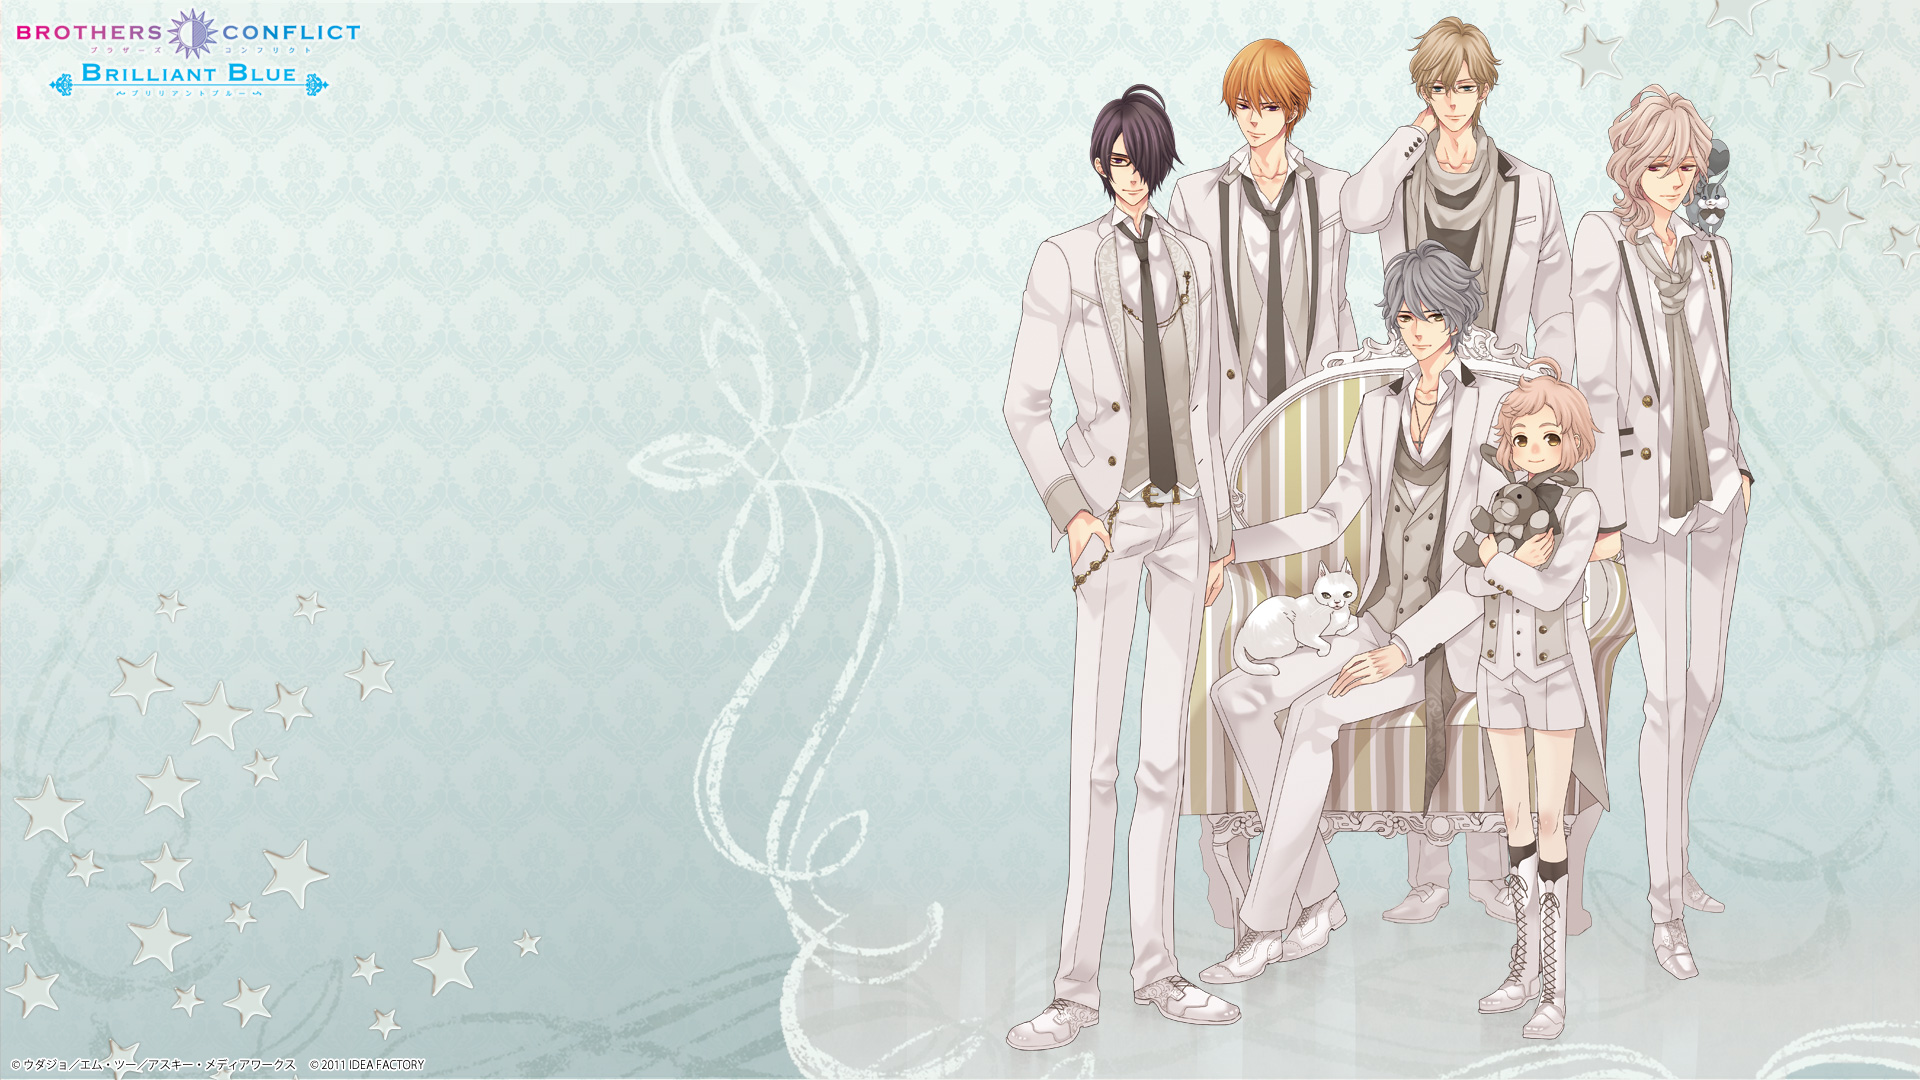 brothers, Conflict Wallpaper